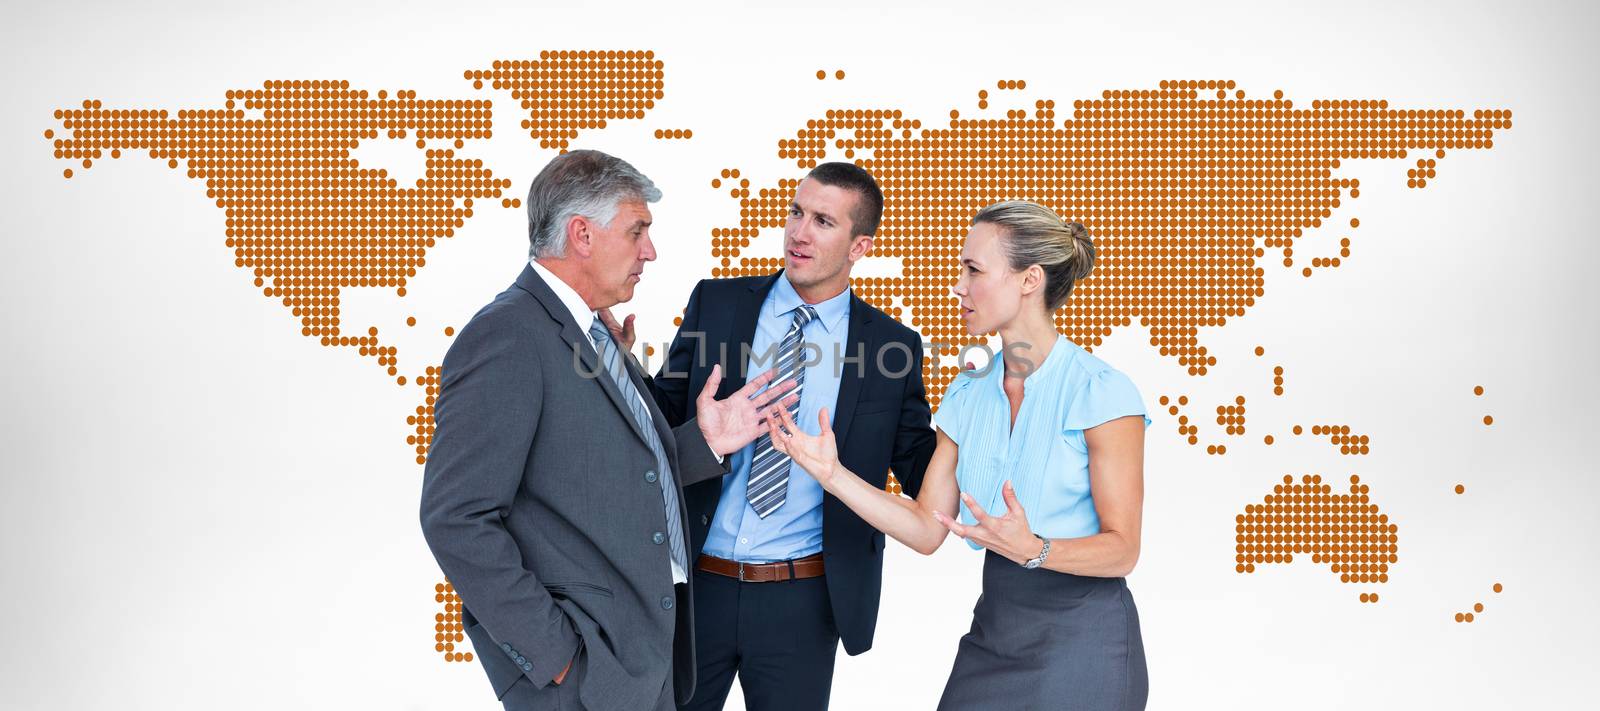 Composite image of business people having a disagreement by Wavebreakmedia